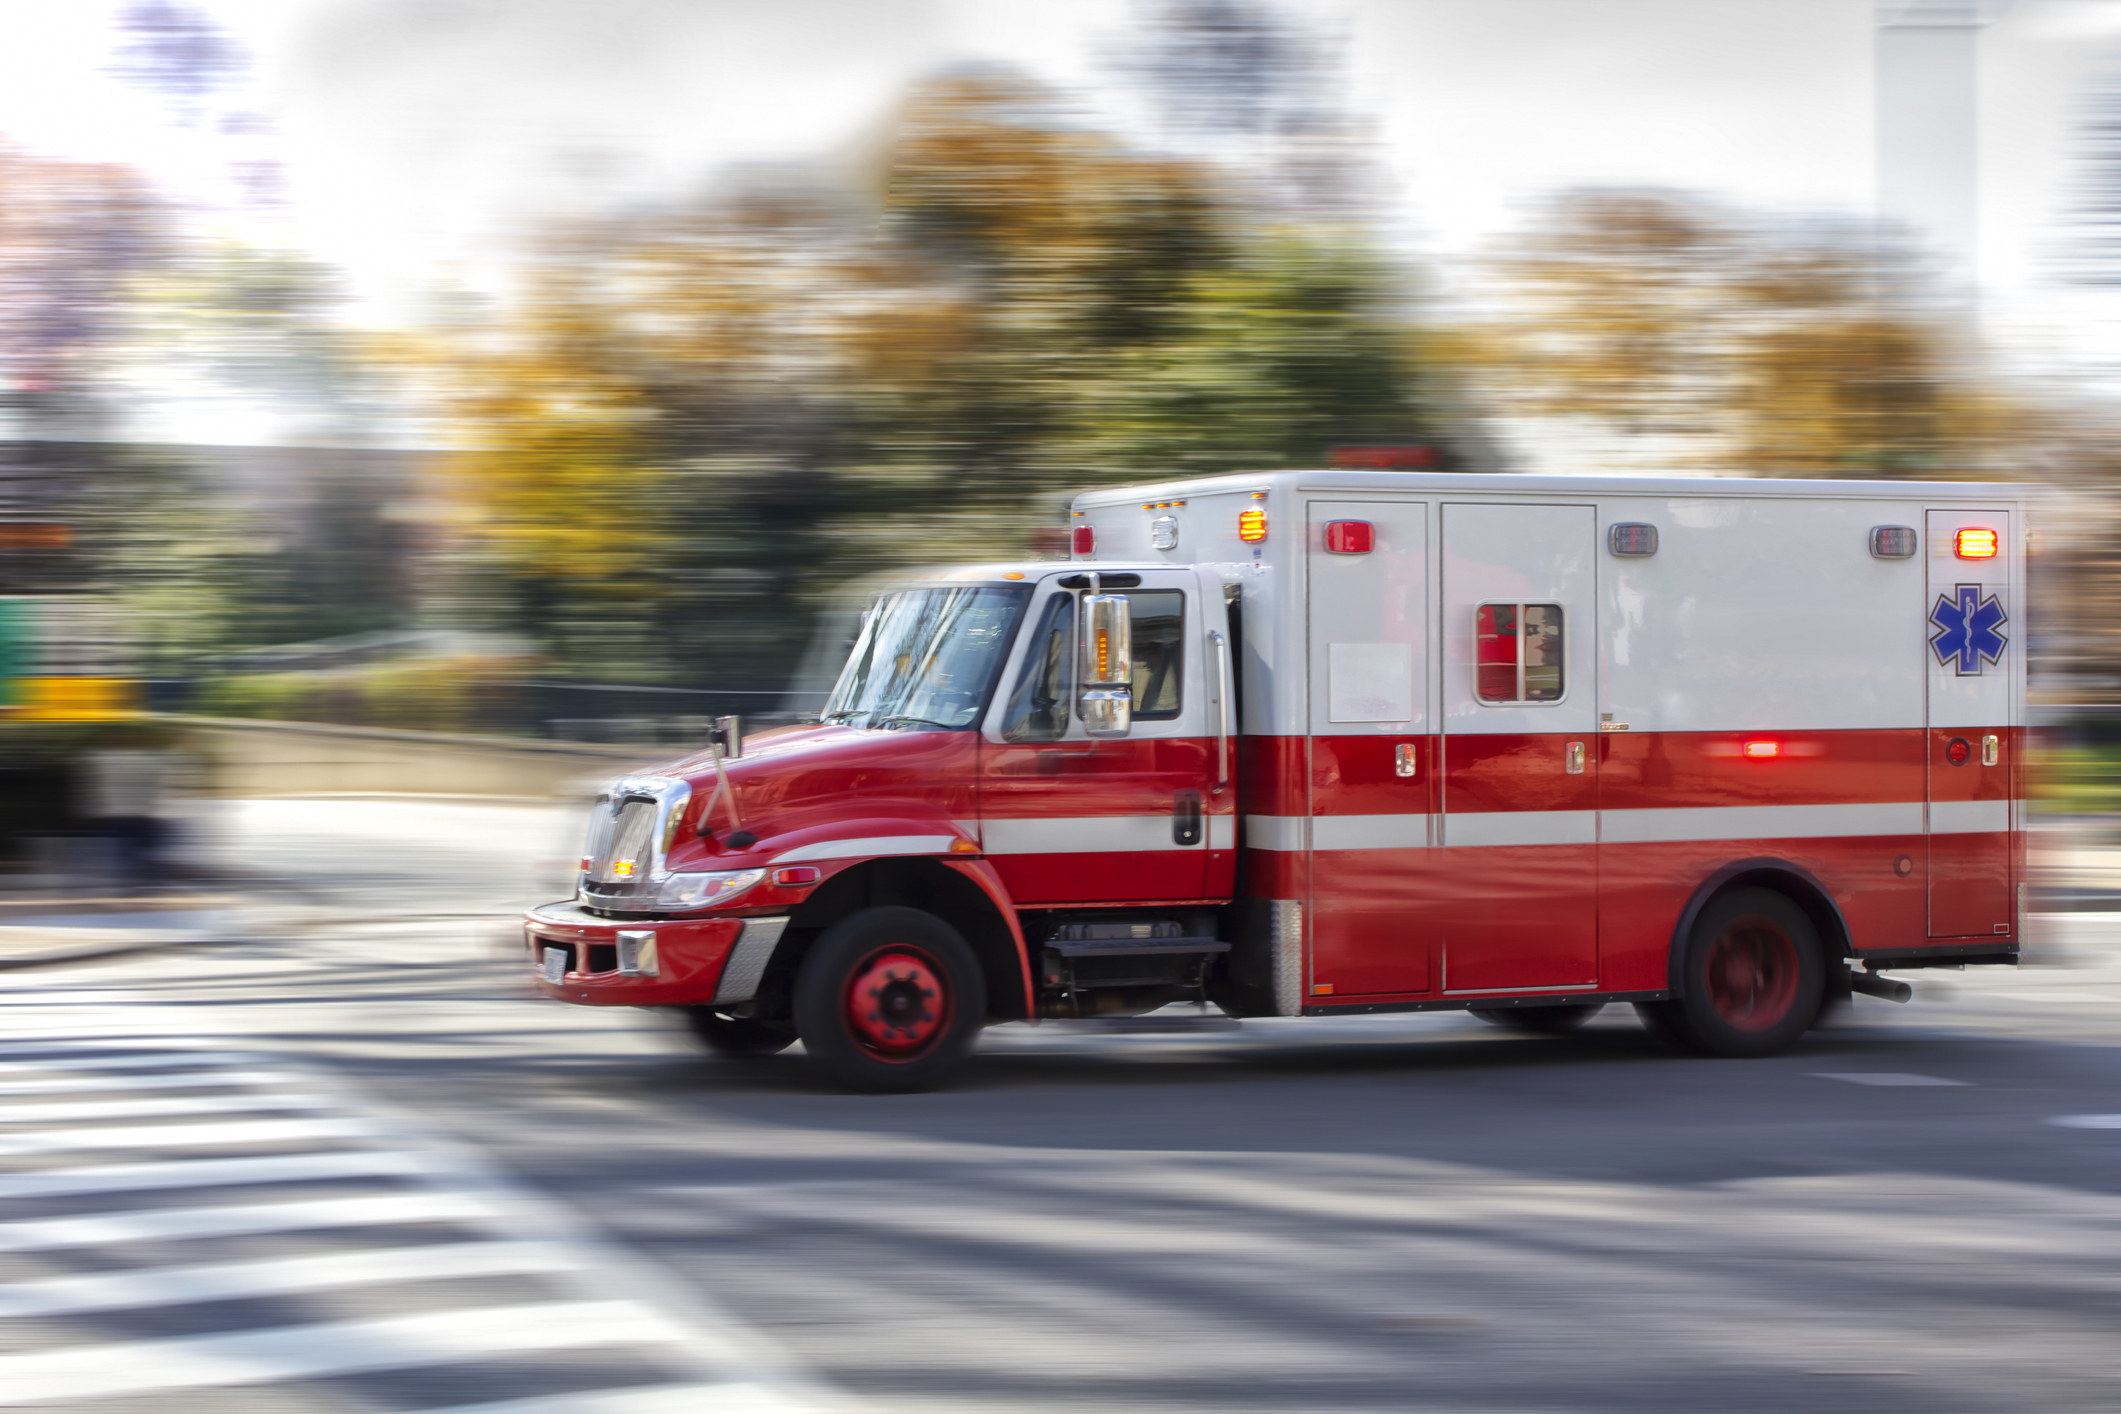 Ambulance in motion on the street with blurred background indicating speed